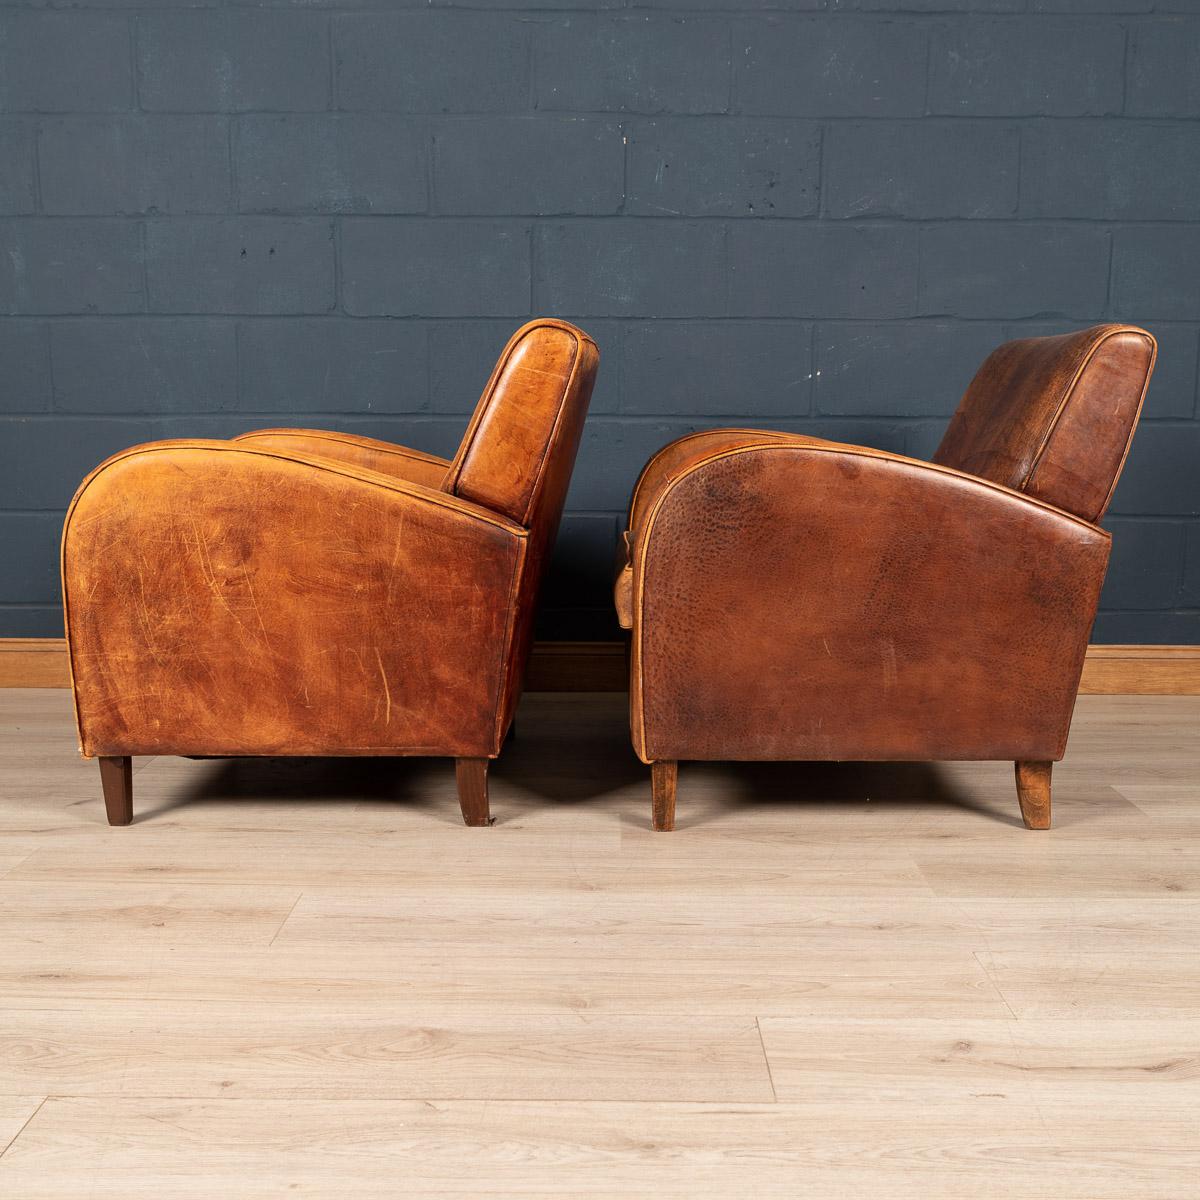 Showing superb patina and colour, this wonderful pair of club chairs were hand upholstered sheepskin leather in Holland by the finest craftsmen. An unusual Art Deco style model and of excellent quality. Fantastic look for any interior, both modern